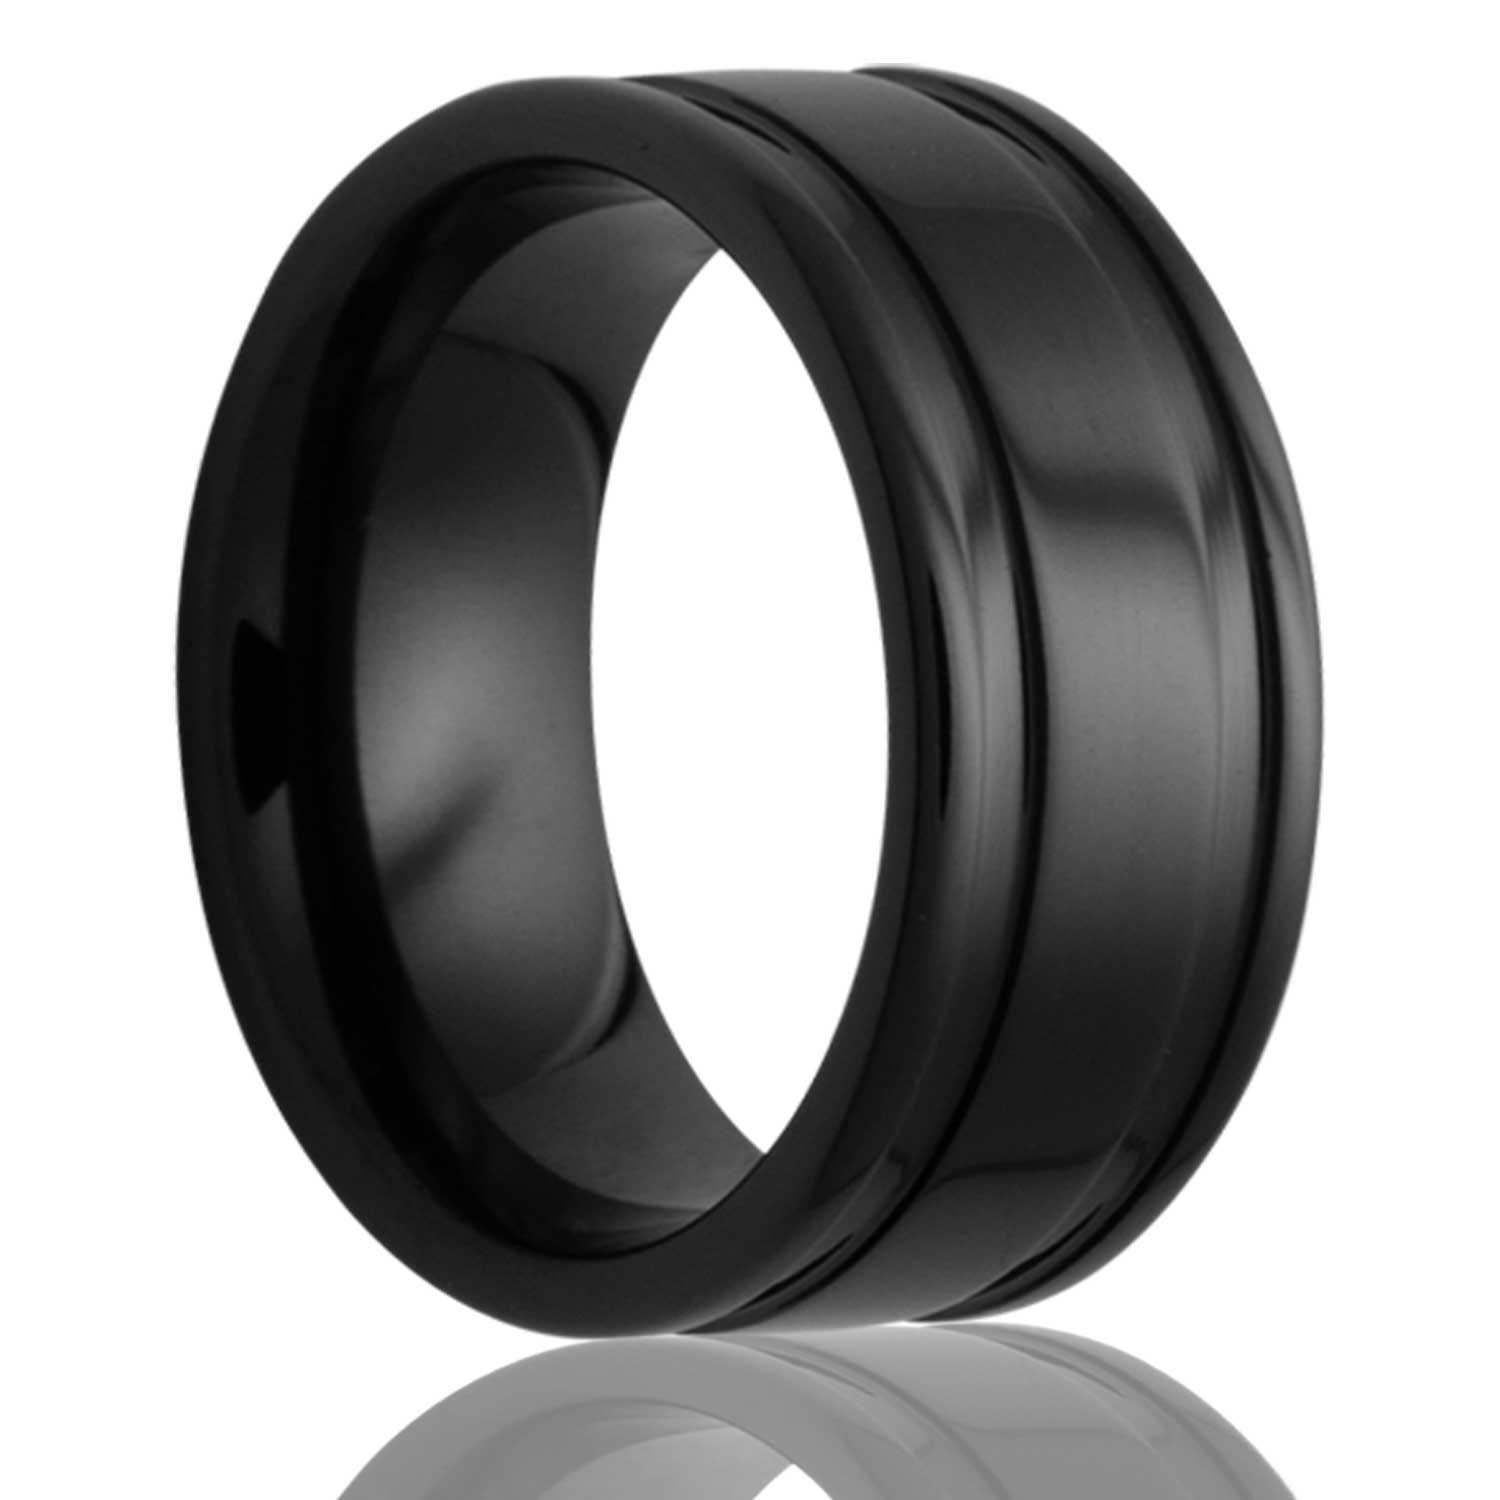 A black ceramic wedding band with grooved edges displayed on a neutral white background.